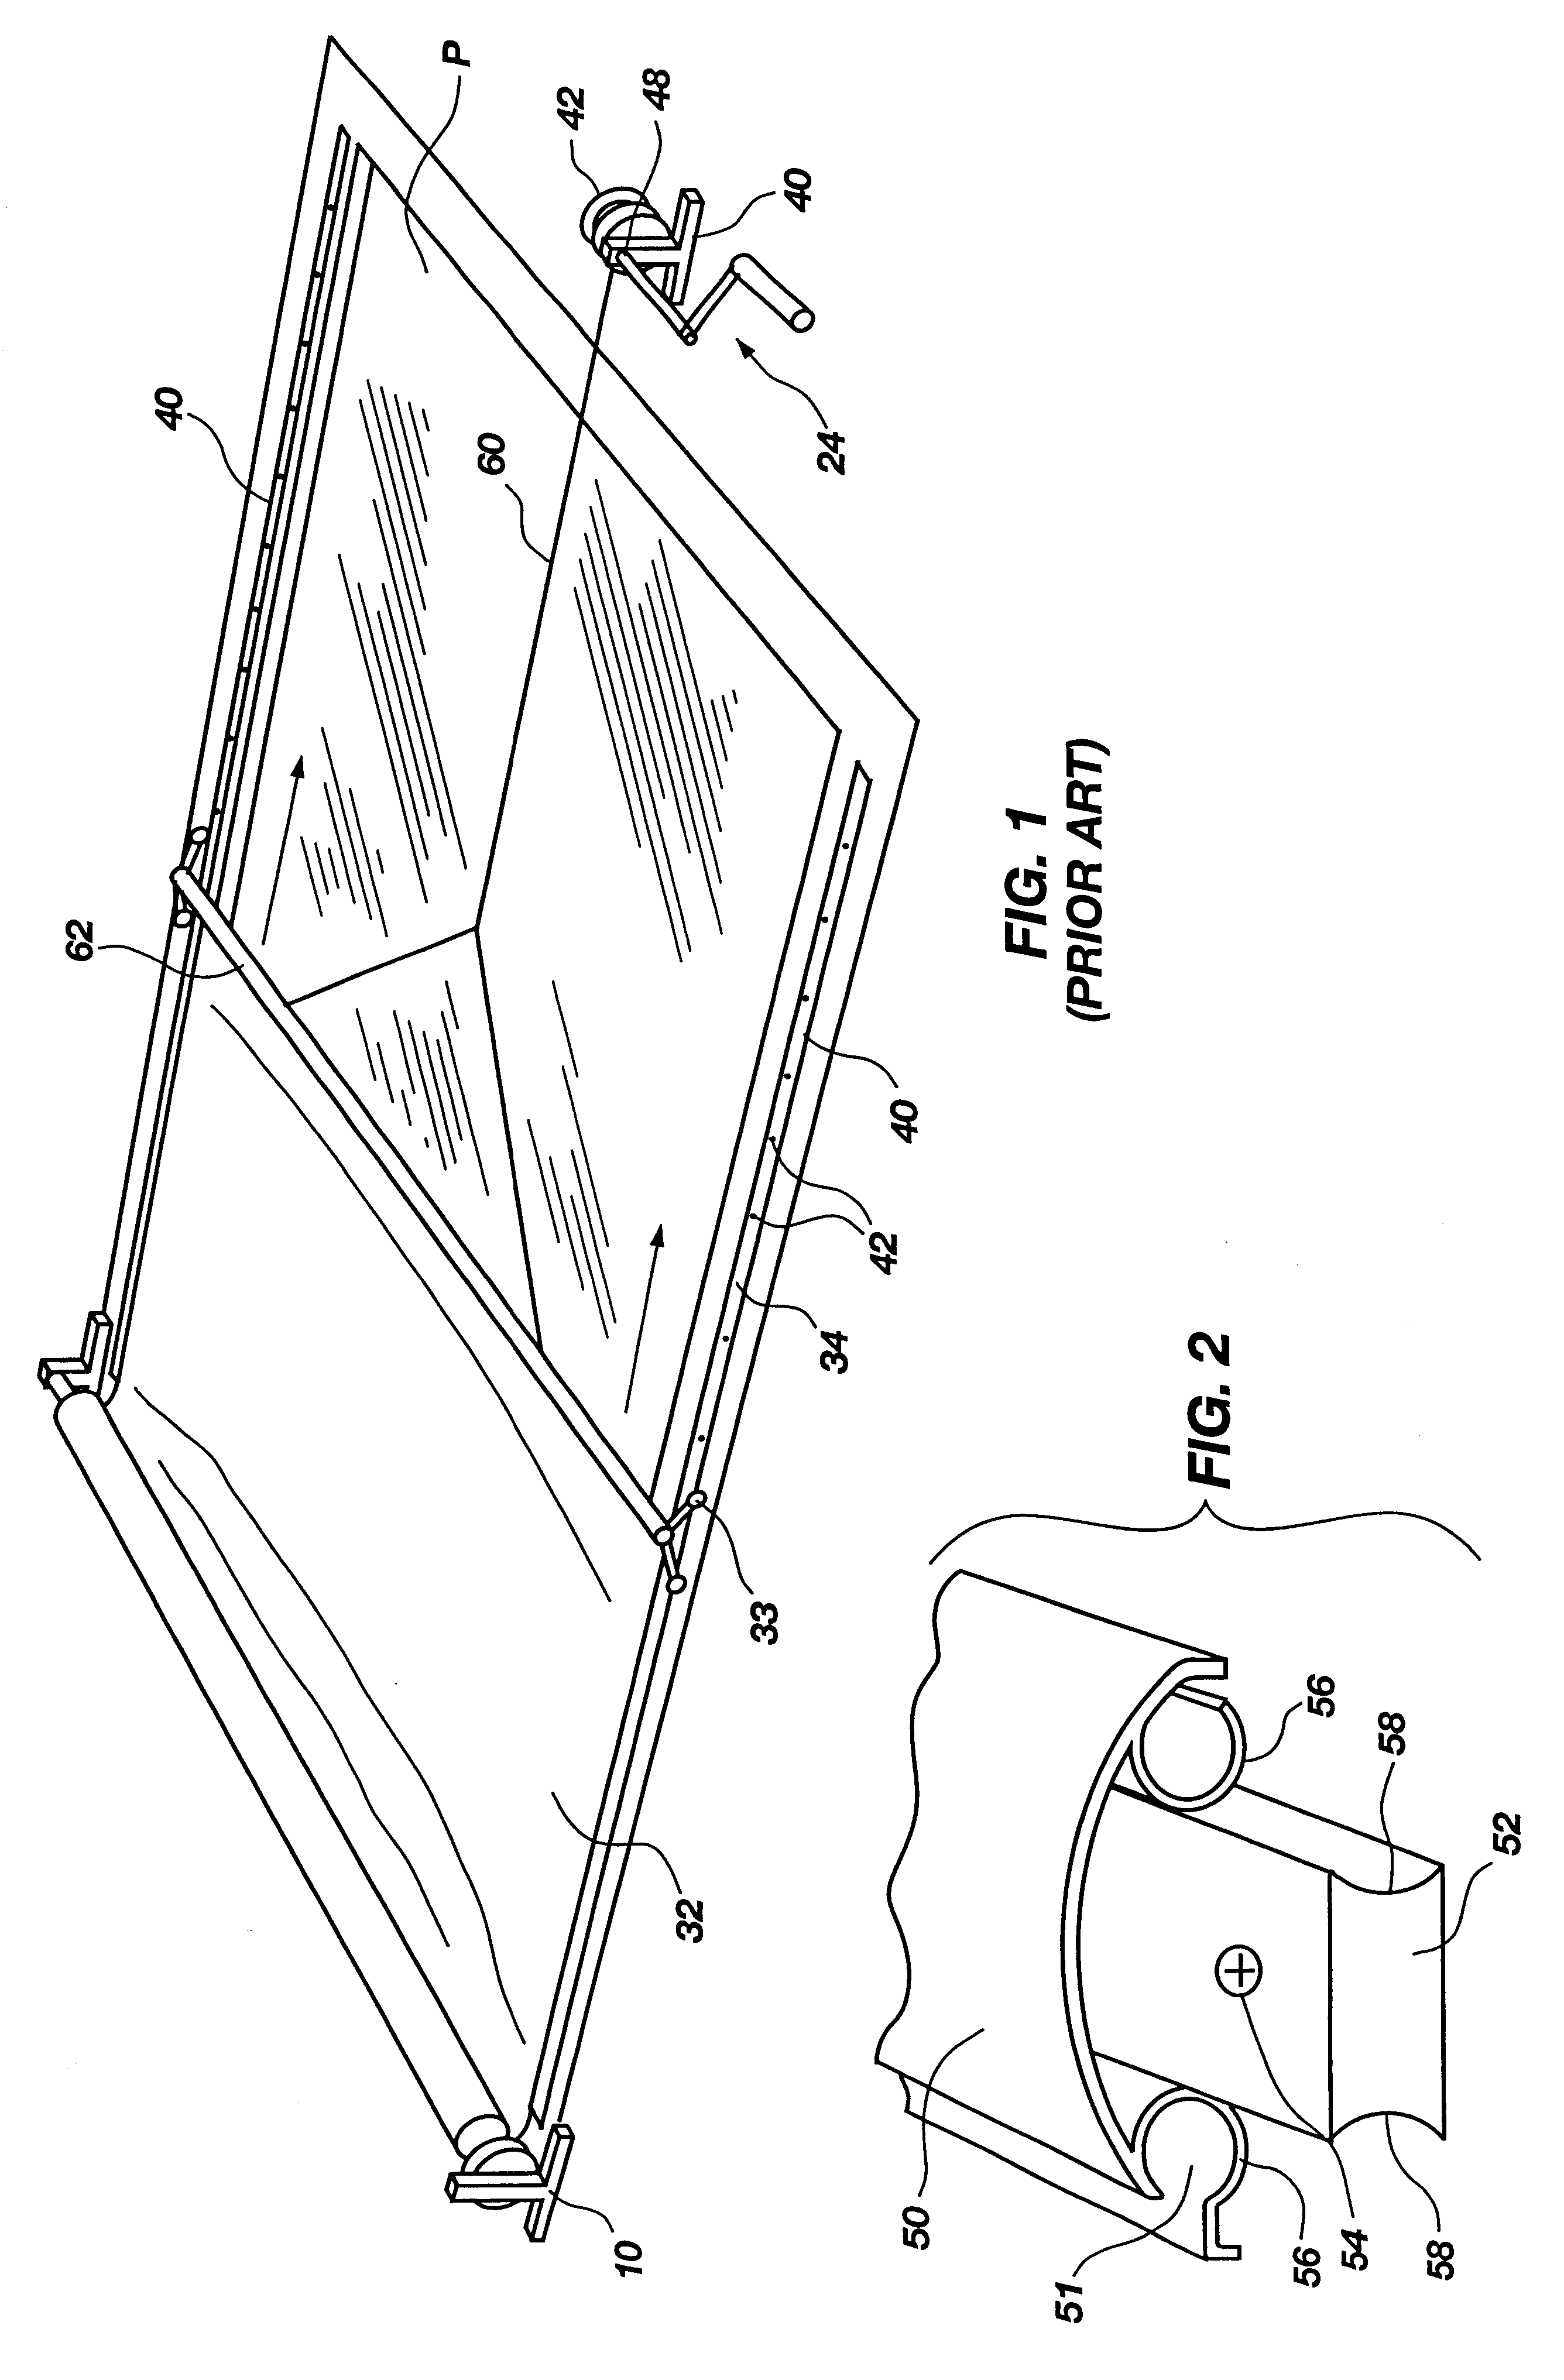 Pool cover tracking system